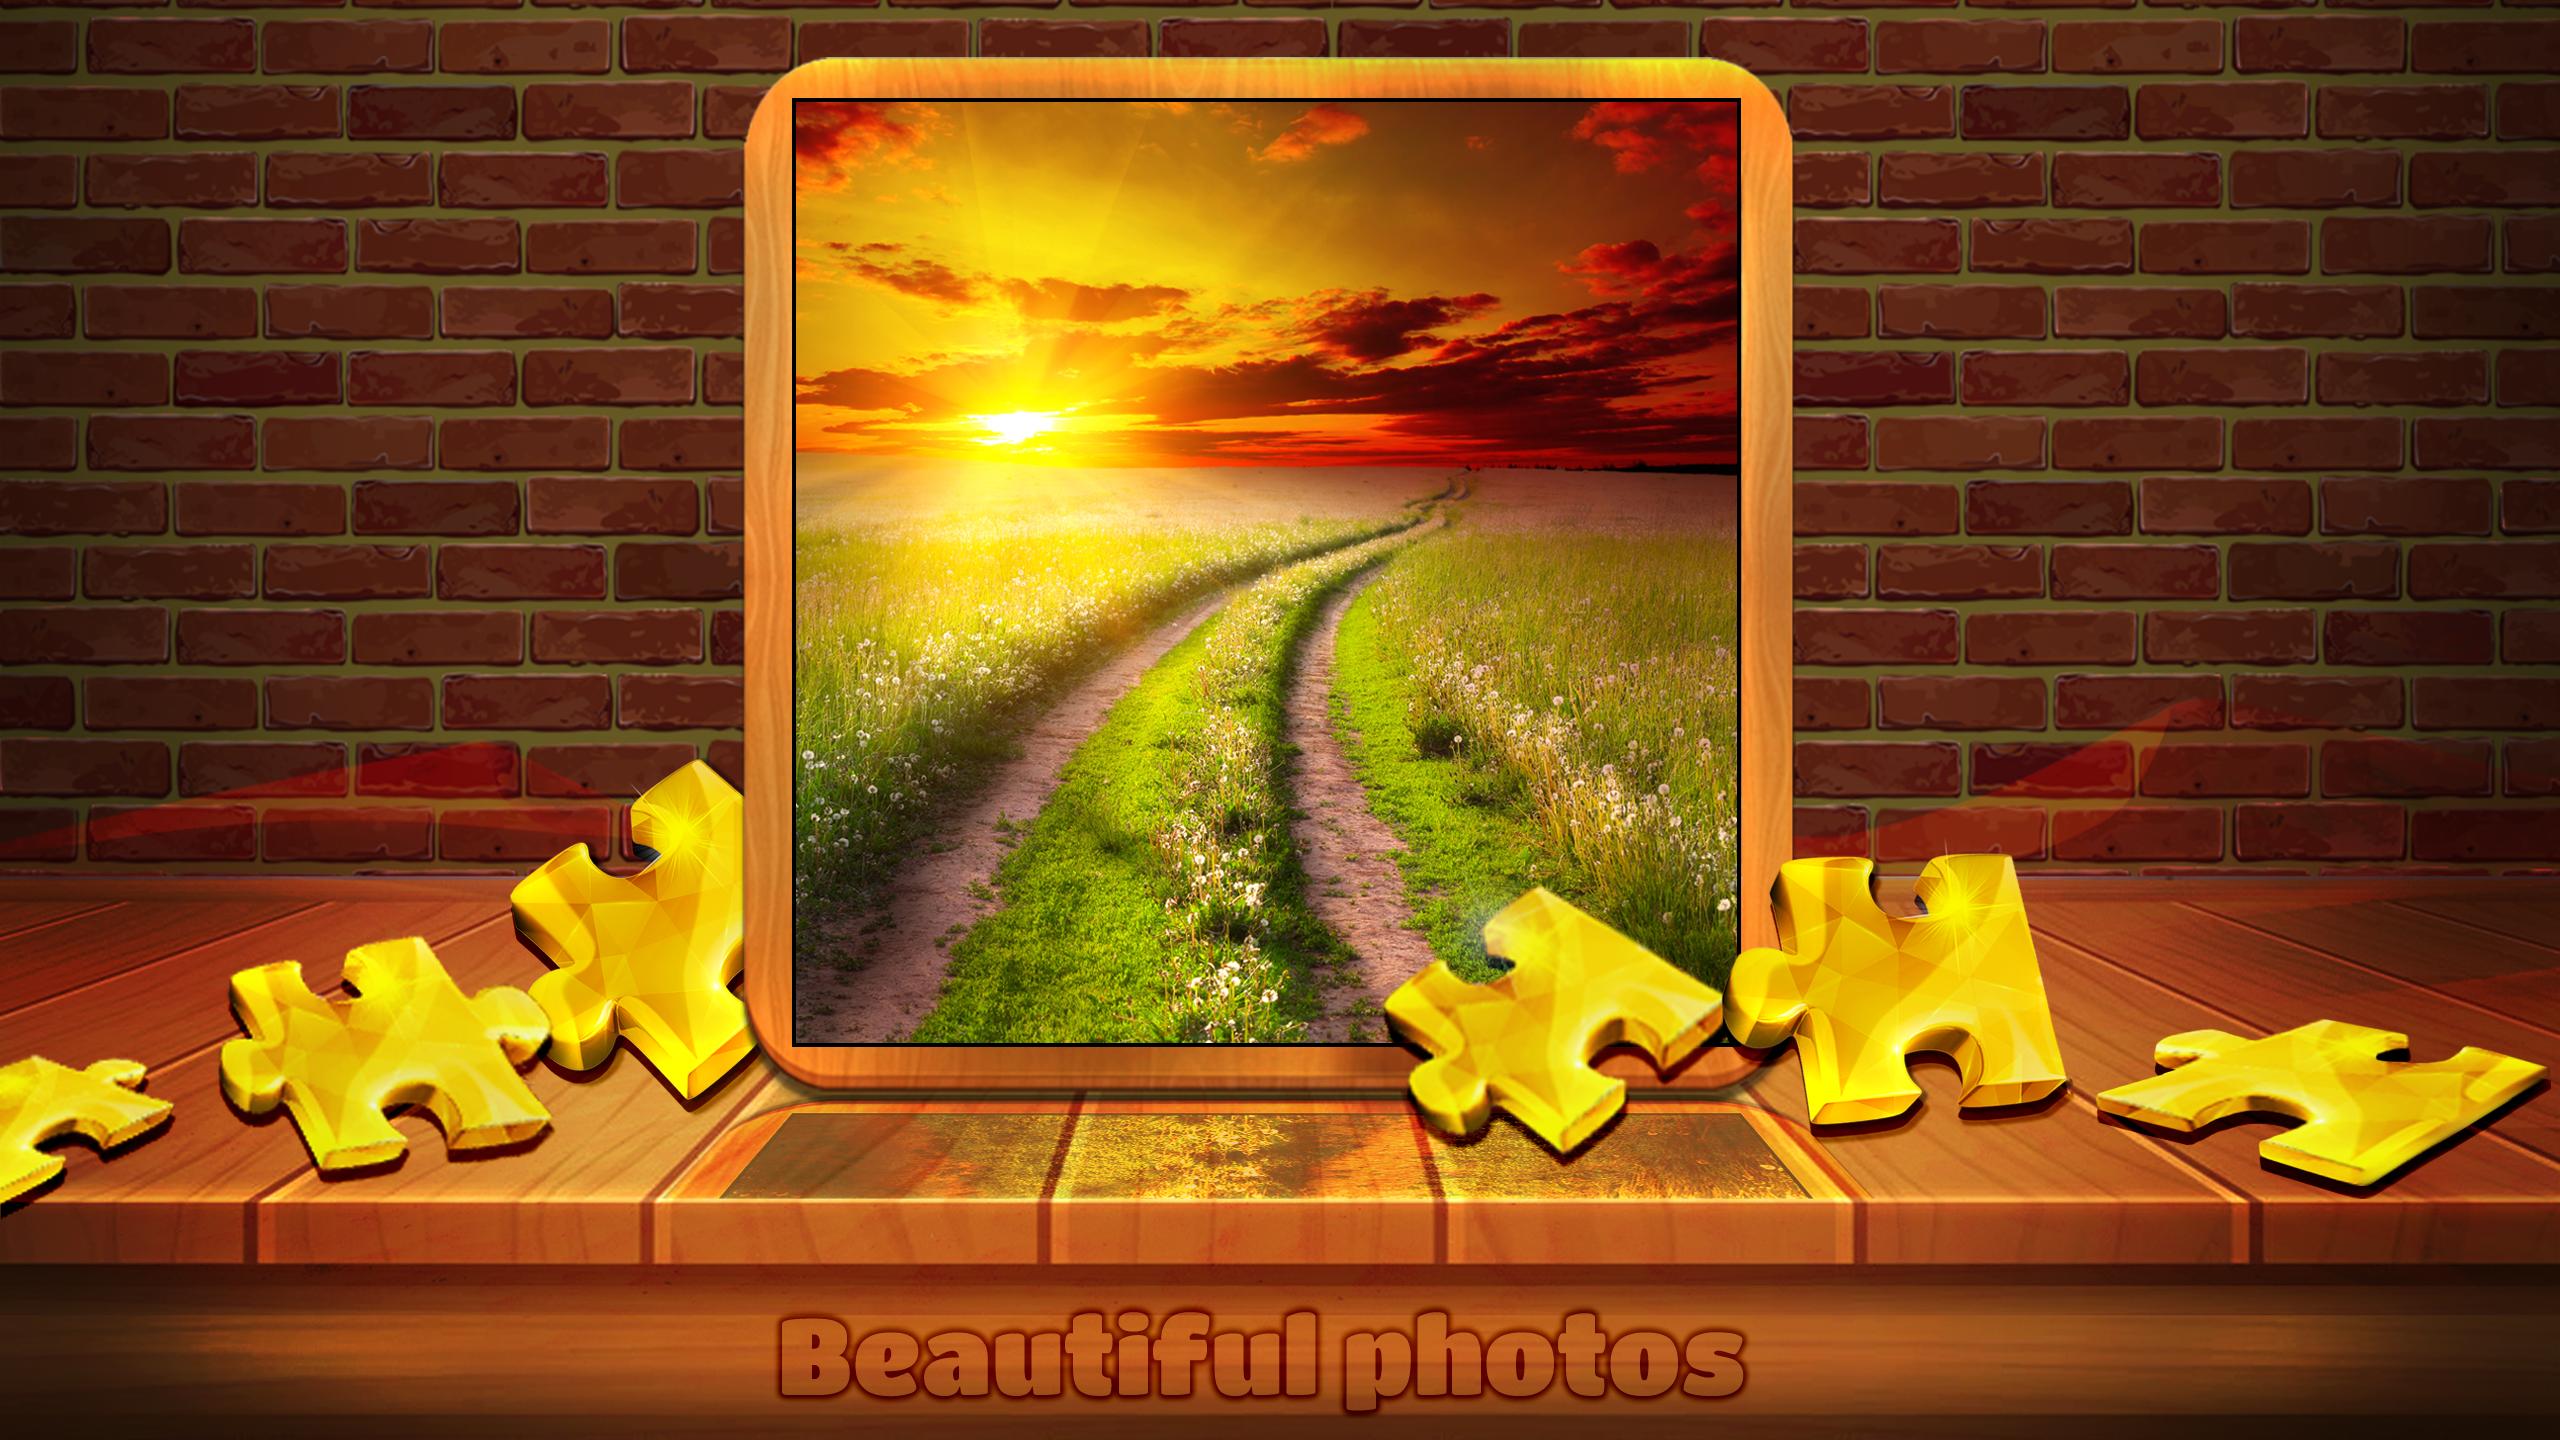 Jigsaw Puzzles - Free Jigsaw Puzzle Games for Android - APK Download